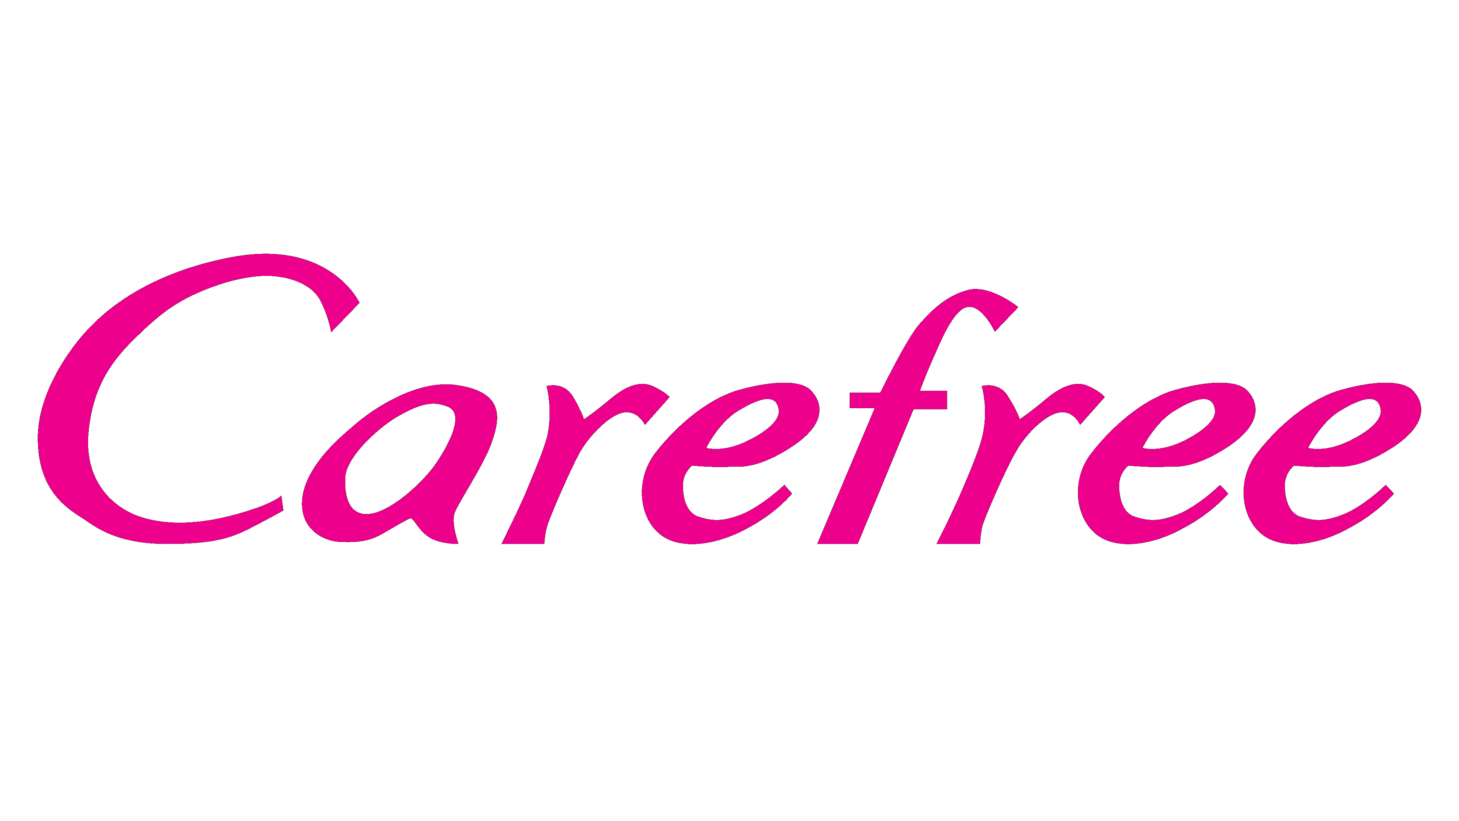 Carefree sign 2011 2016